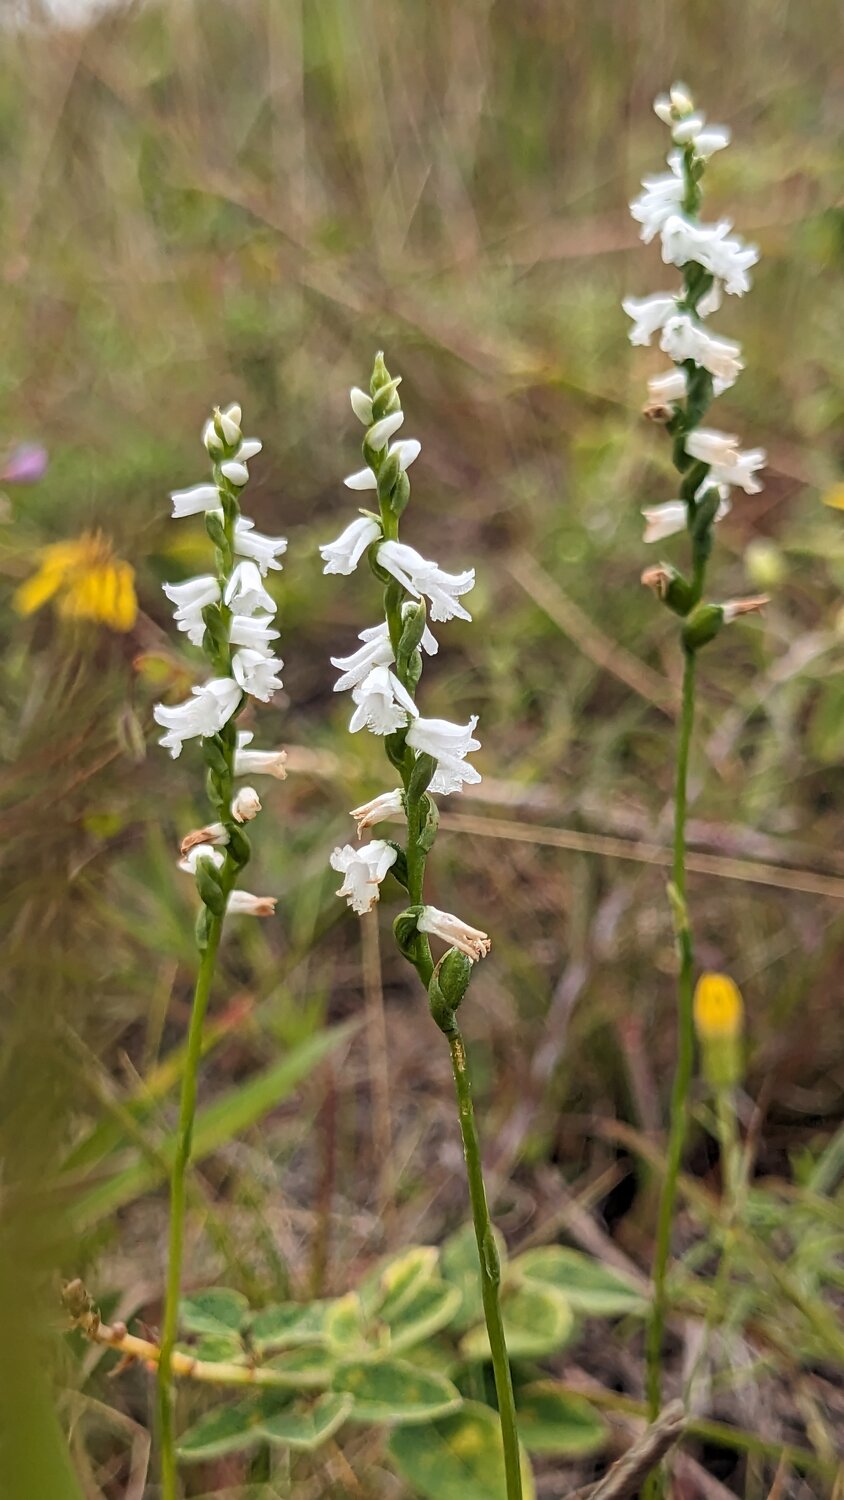 Lady’s tresses, a small white species of orchid, grow inches from the ground.